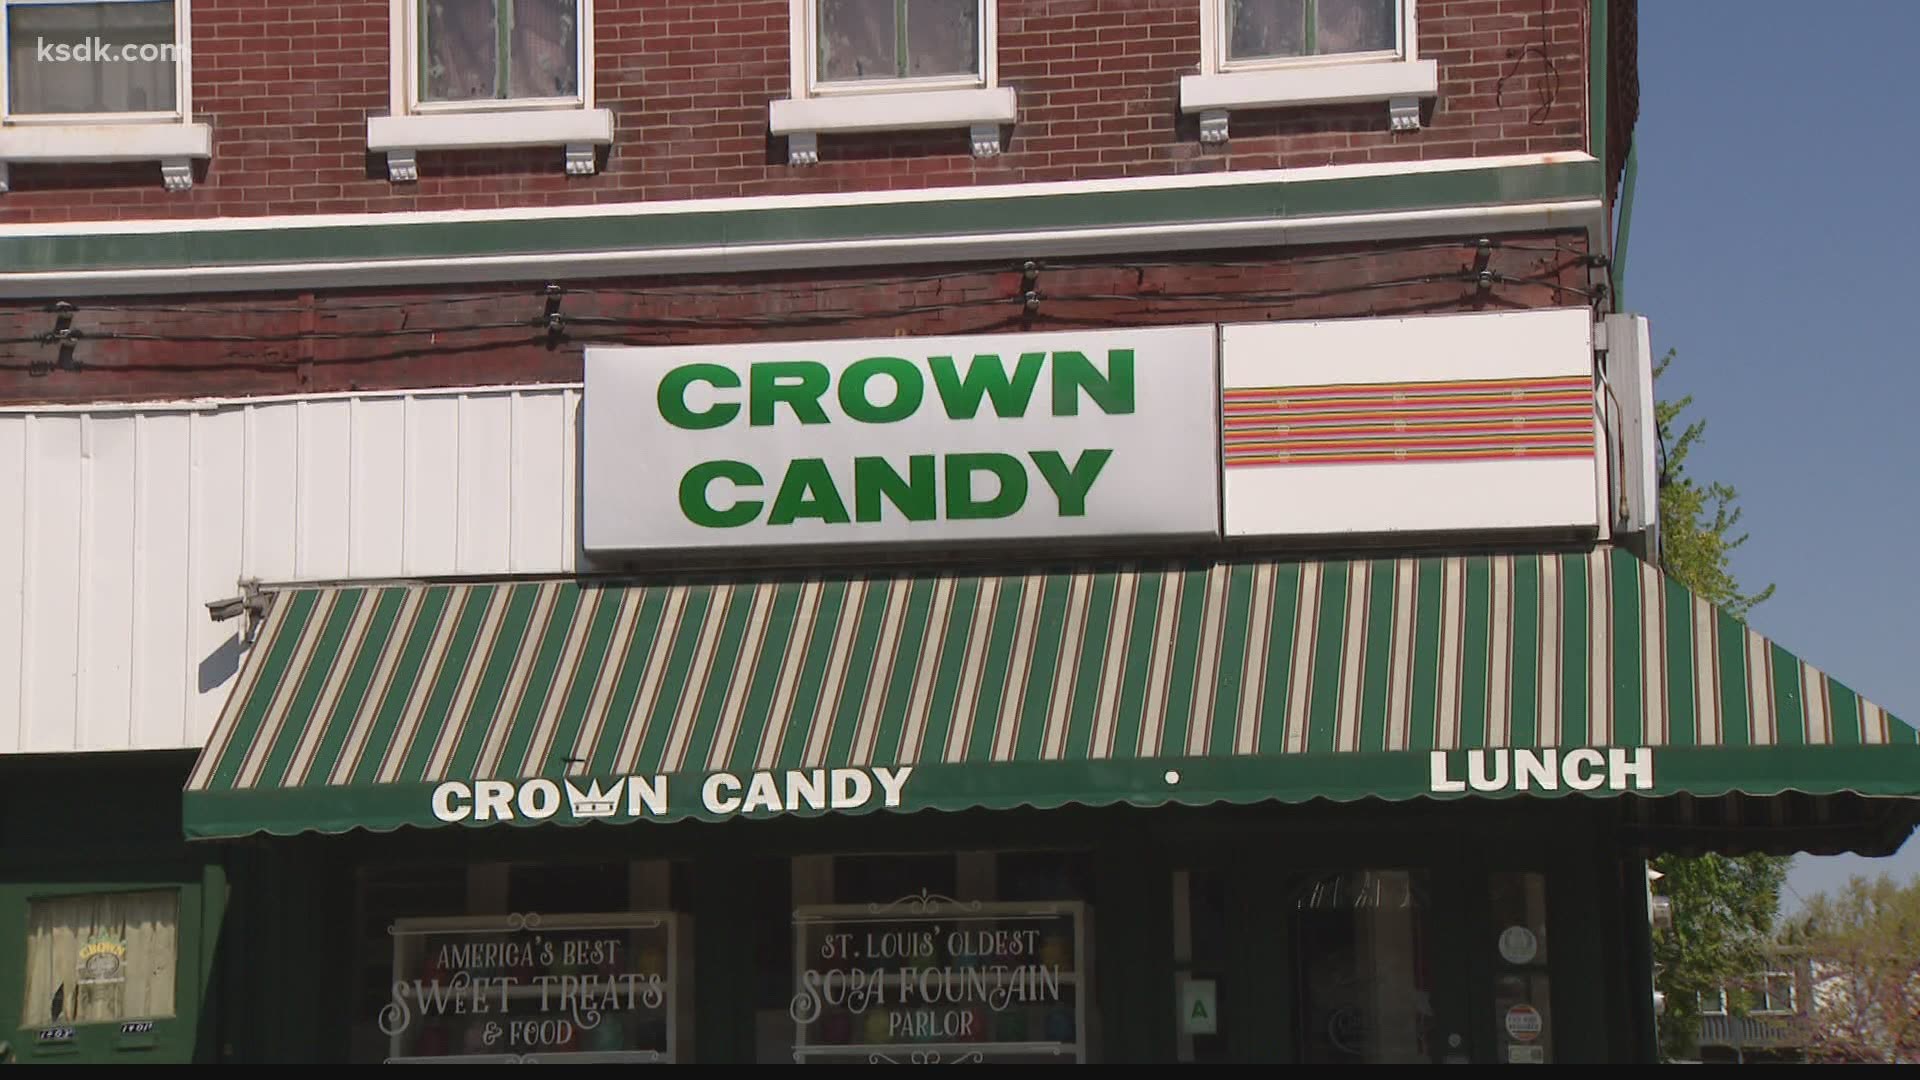 Crown Candy received $100,000 in renovations and funds from Todd Graves, the founder and CEO of Raising Canes